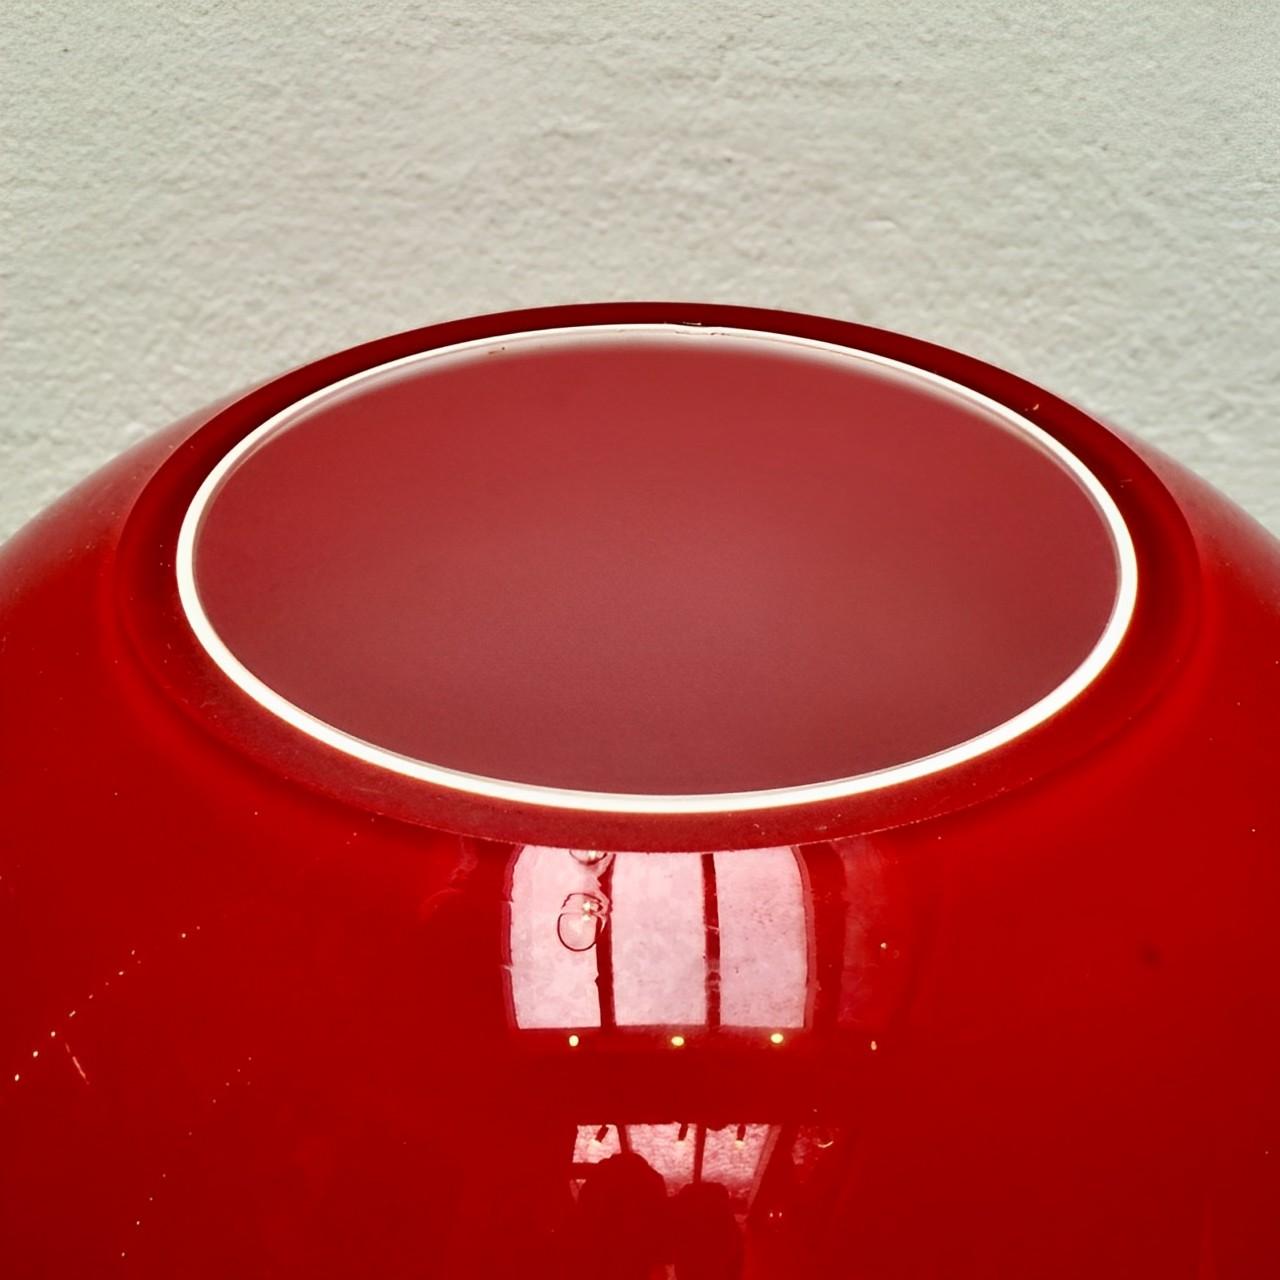 Heavy art glass ball vase, in red graduating to a darker red base, with a white interior. The vase has a wonderful organic round shape. Measuring height 18.5 cm / 7.2 inches, and the diameter is approximately 16.9 cm / 6.65 inches.

This is a simple